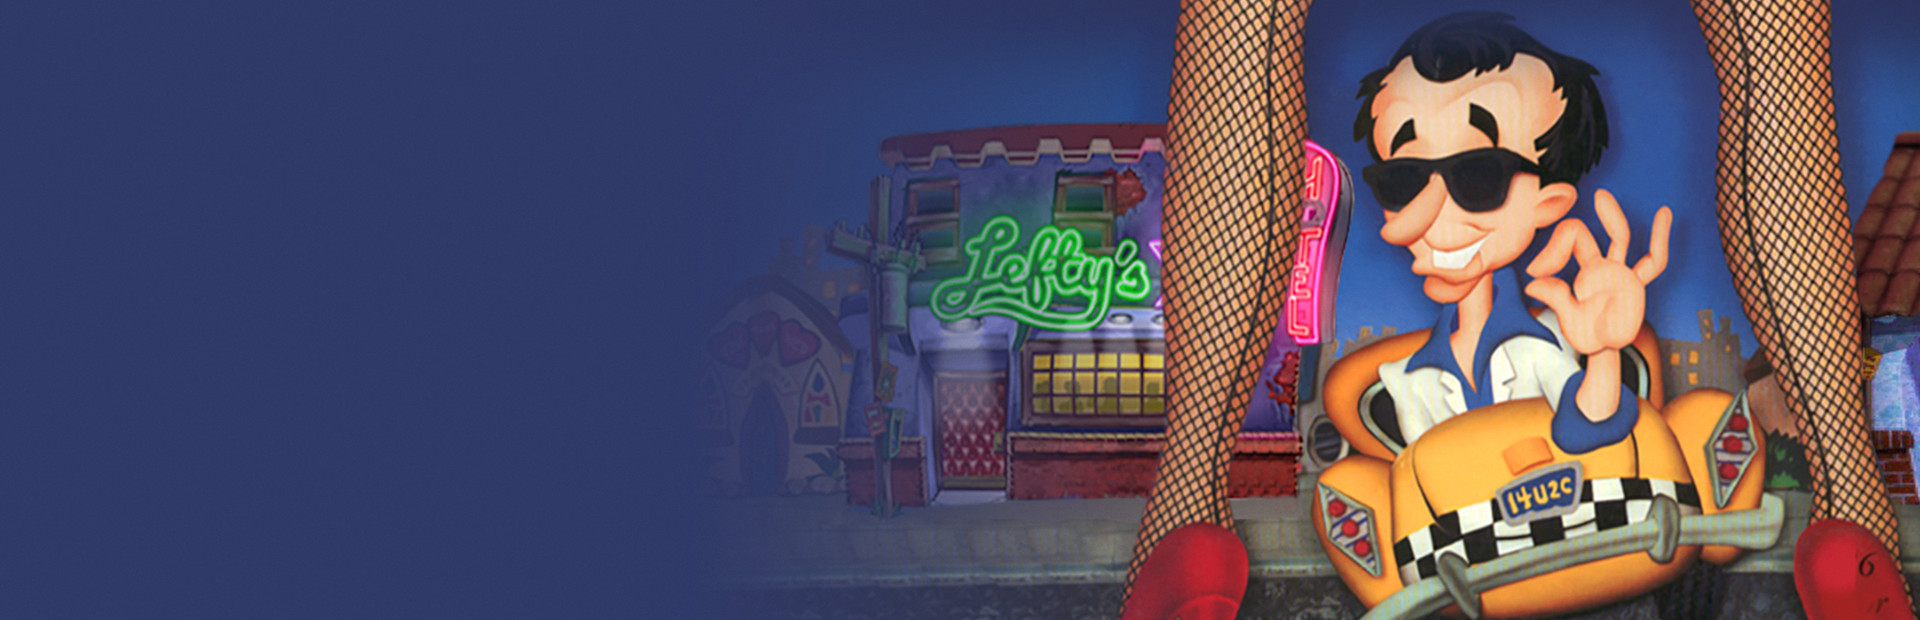 Leisure Suit Larry 1 - In the Land of the Lounge Lizards cover image